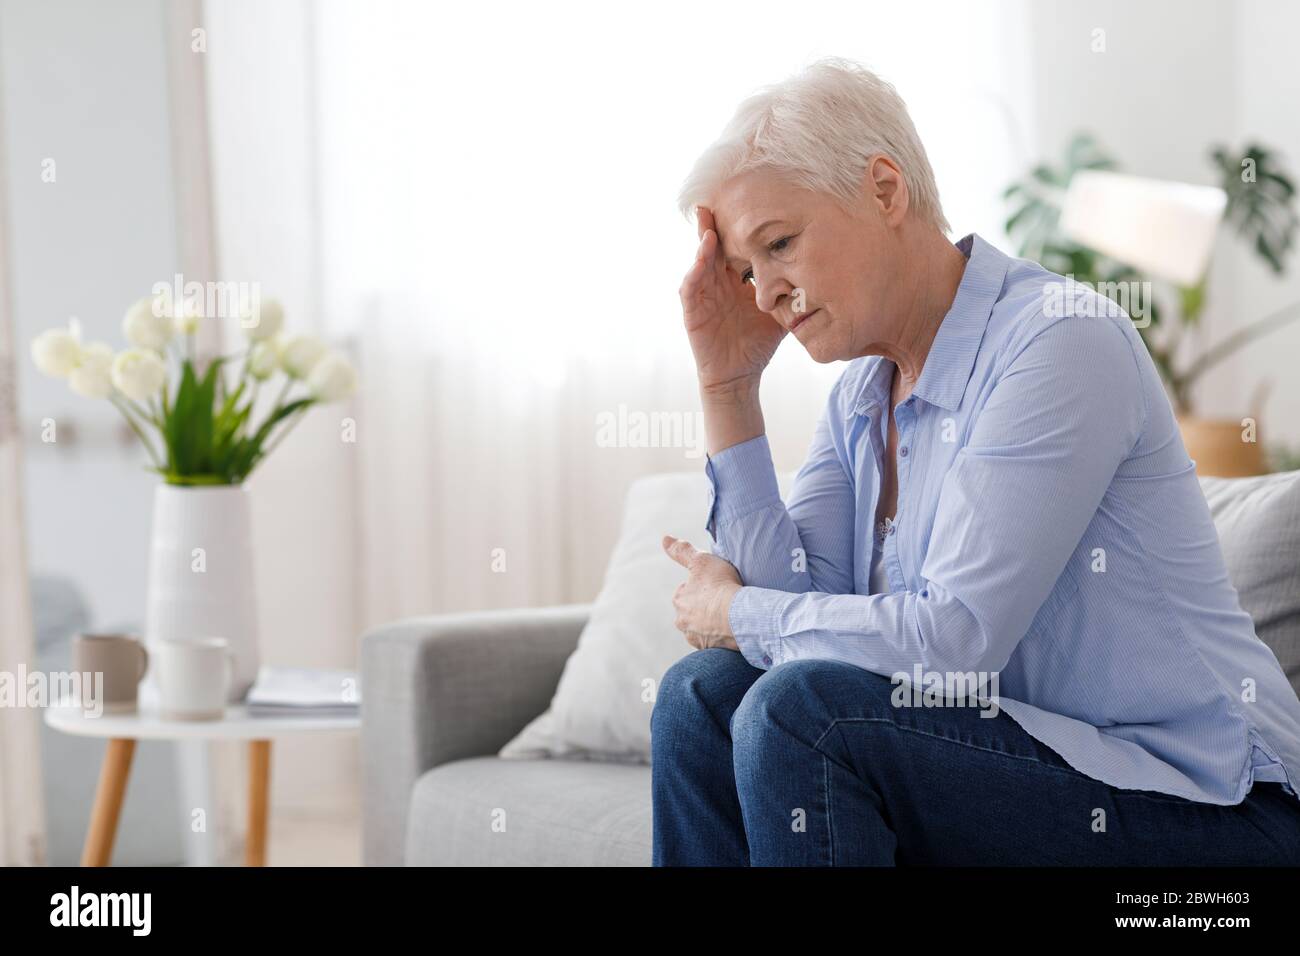 Woman Climax. Portrait Of Depressed Elderly Woman Sitting On Couch At Home Stock Photo